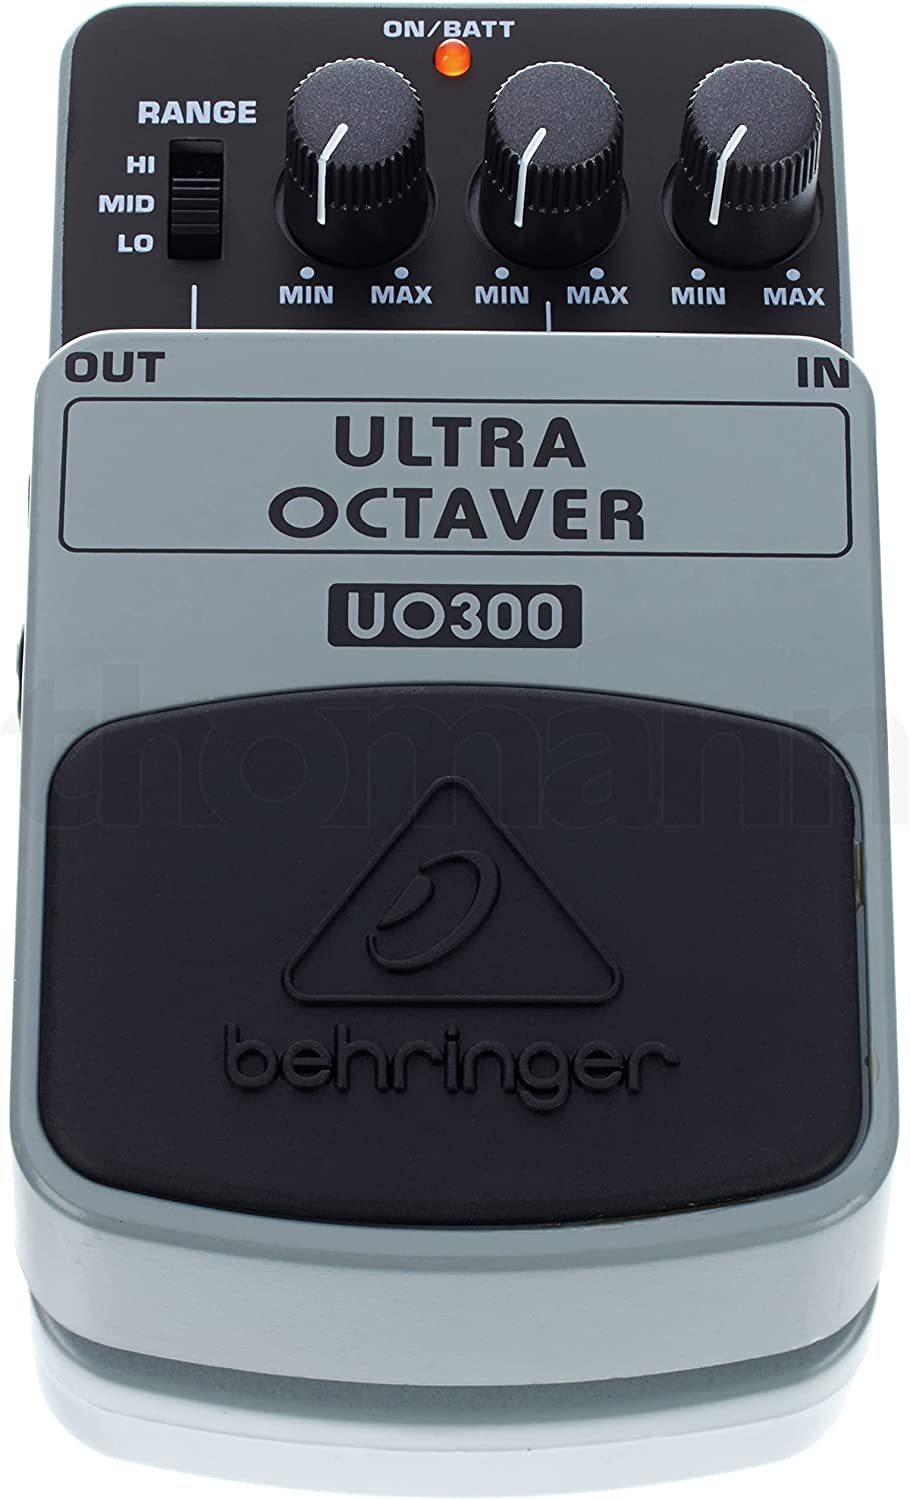 Behringer Ultra Octaver UO300 Pedal on a white background